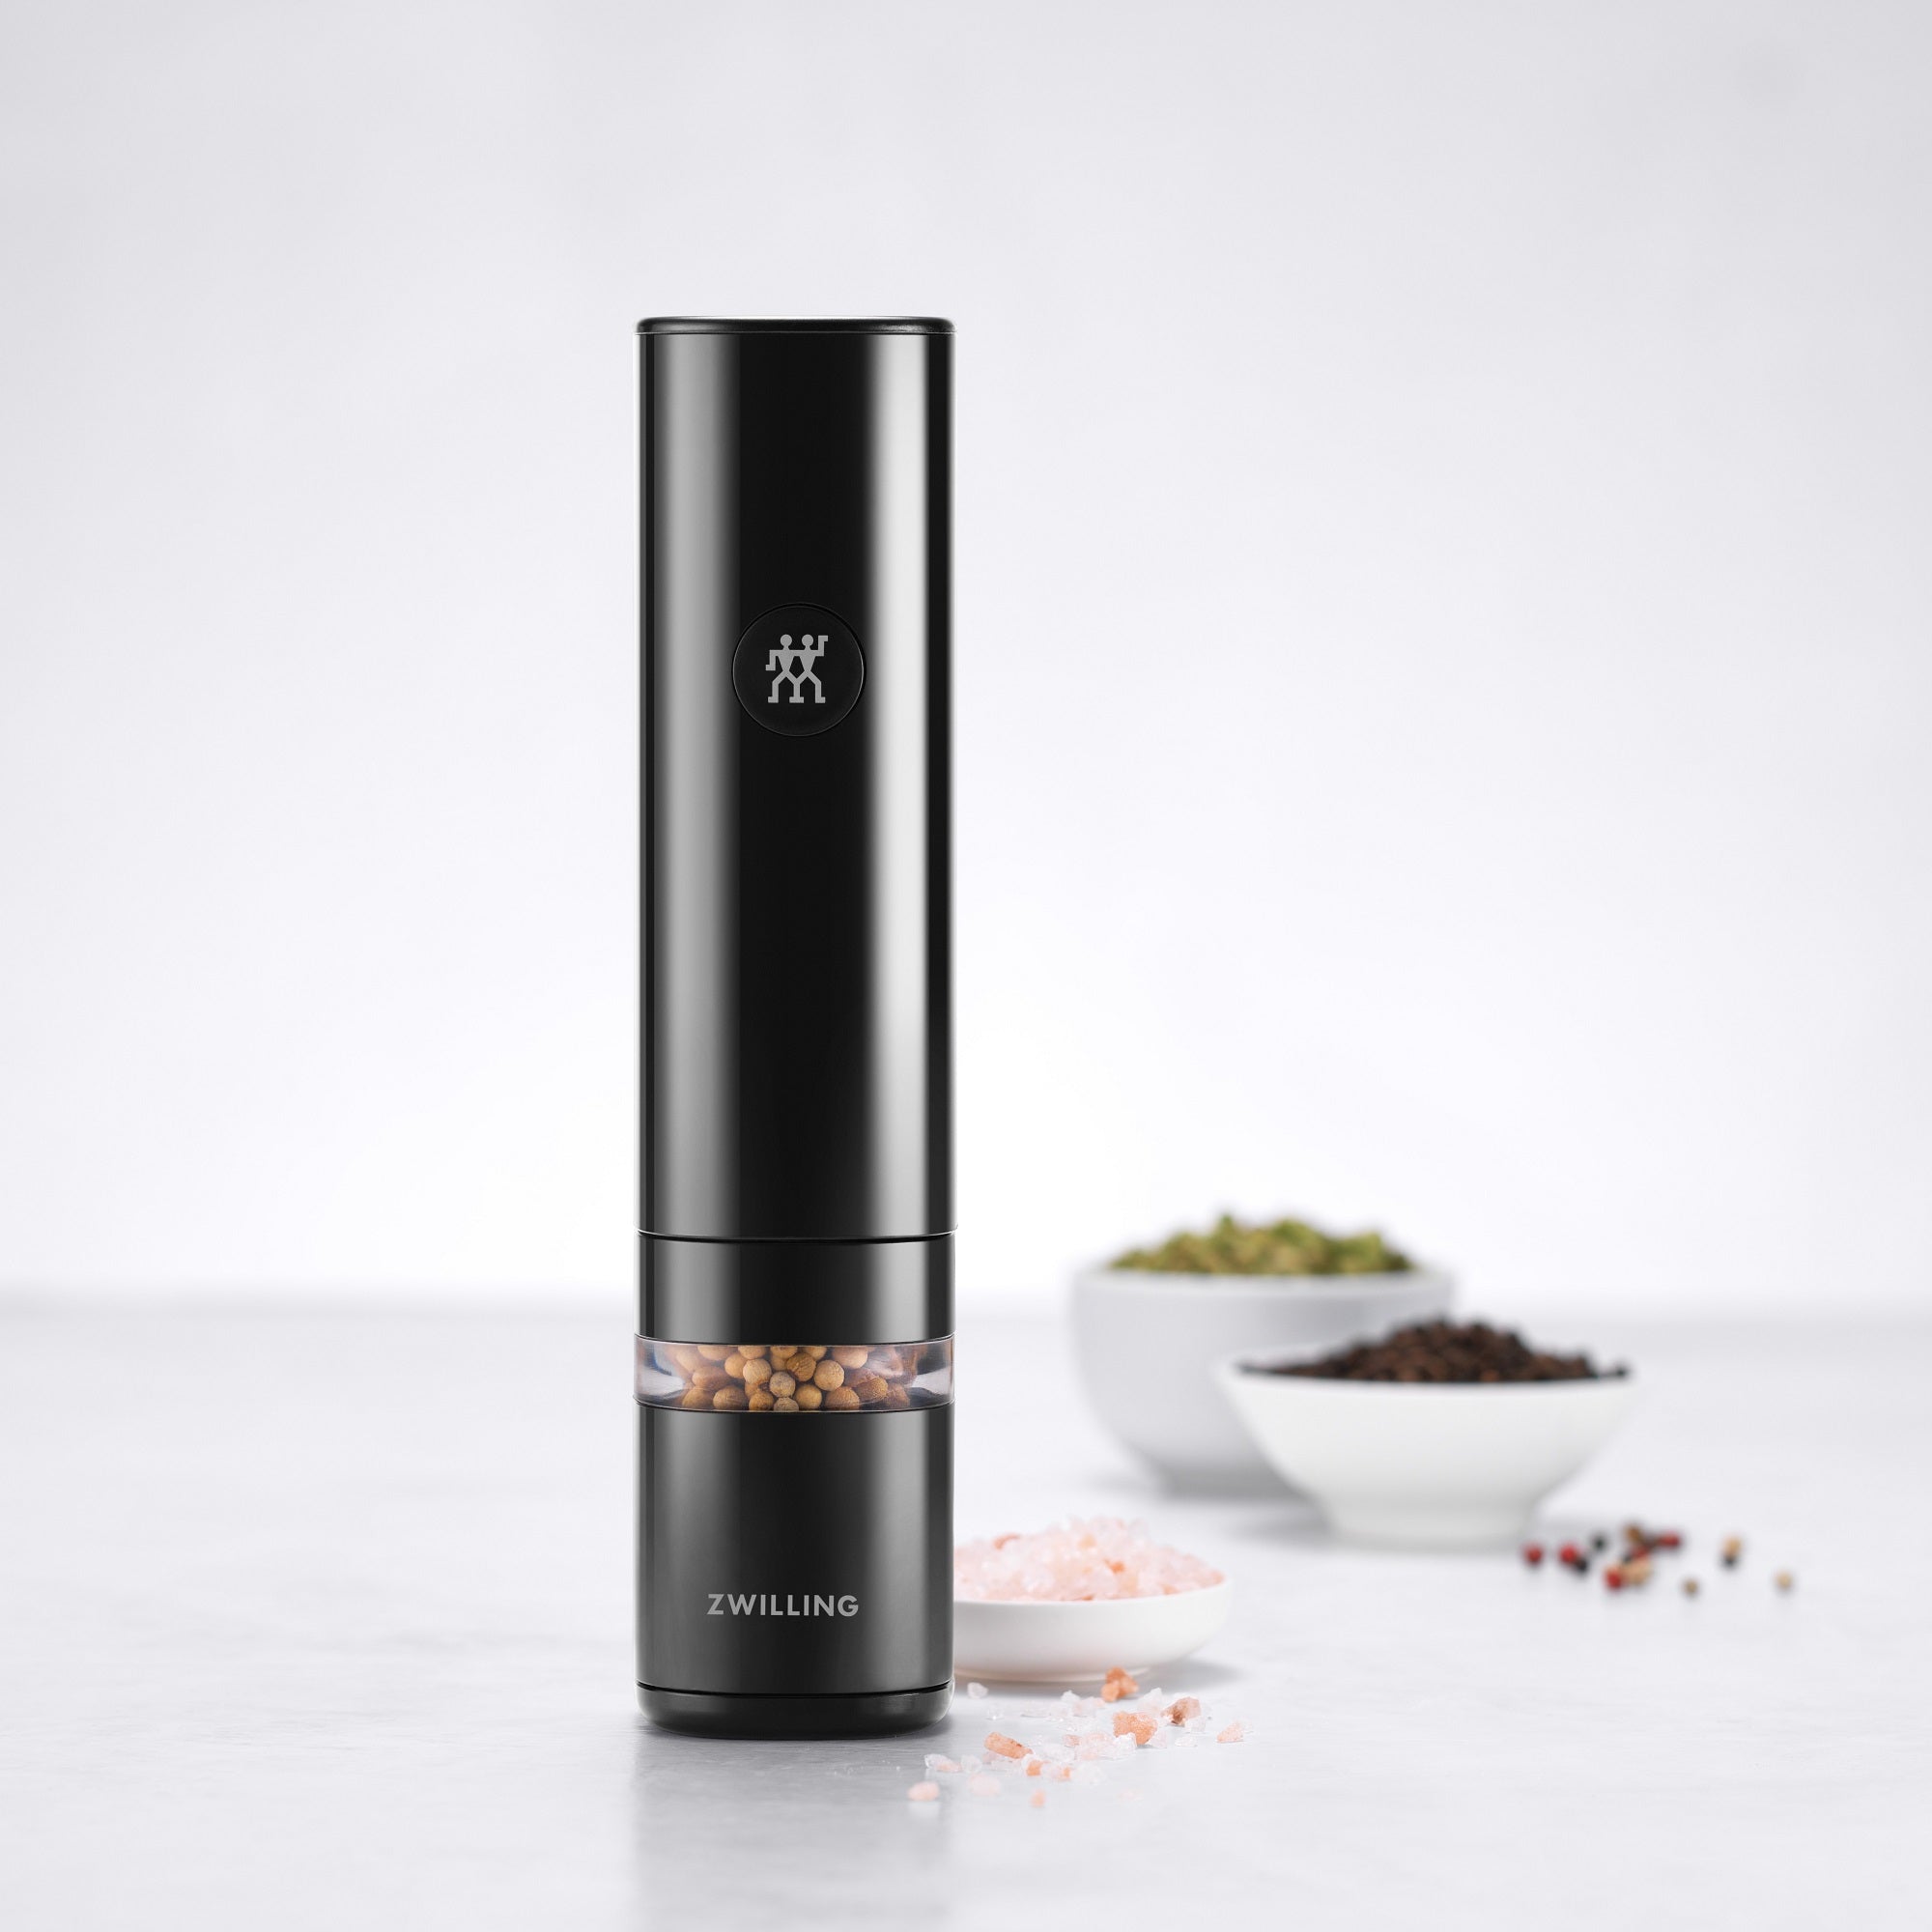 Zwilling Enfinigy Electric Spice Grinder, Black